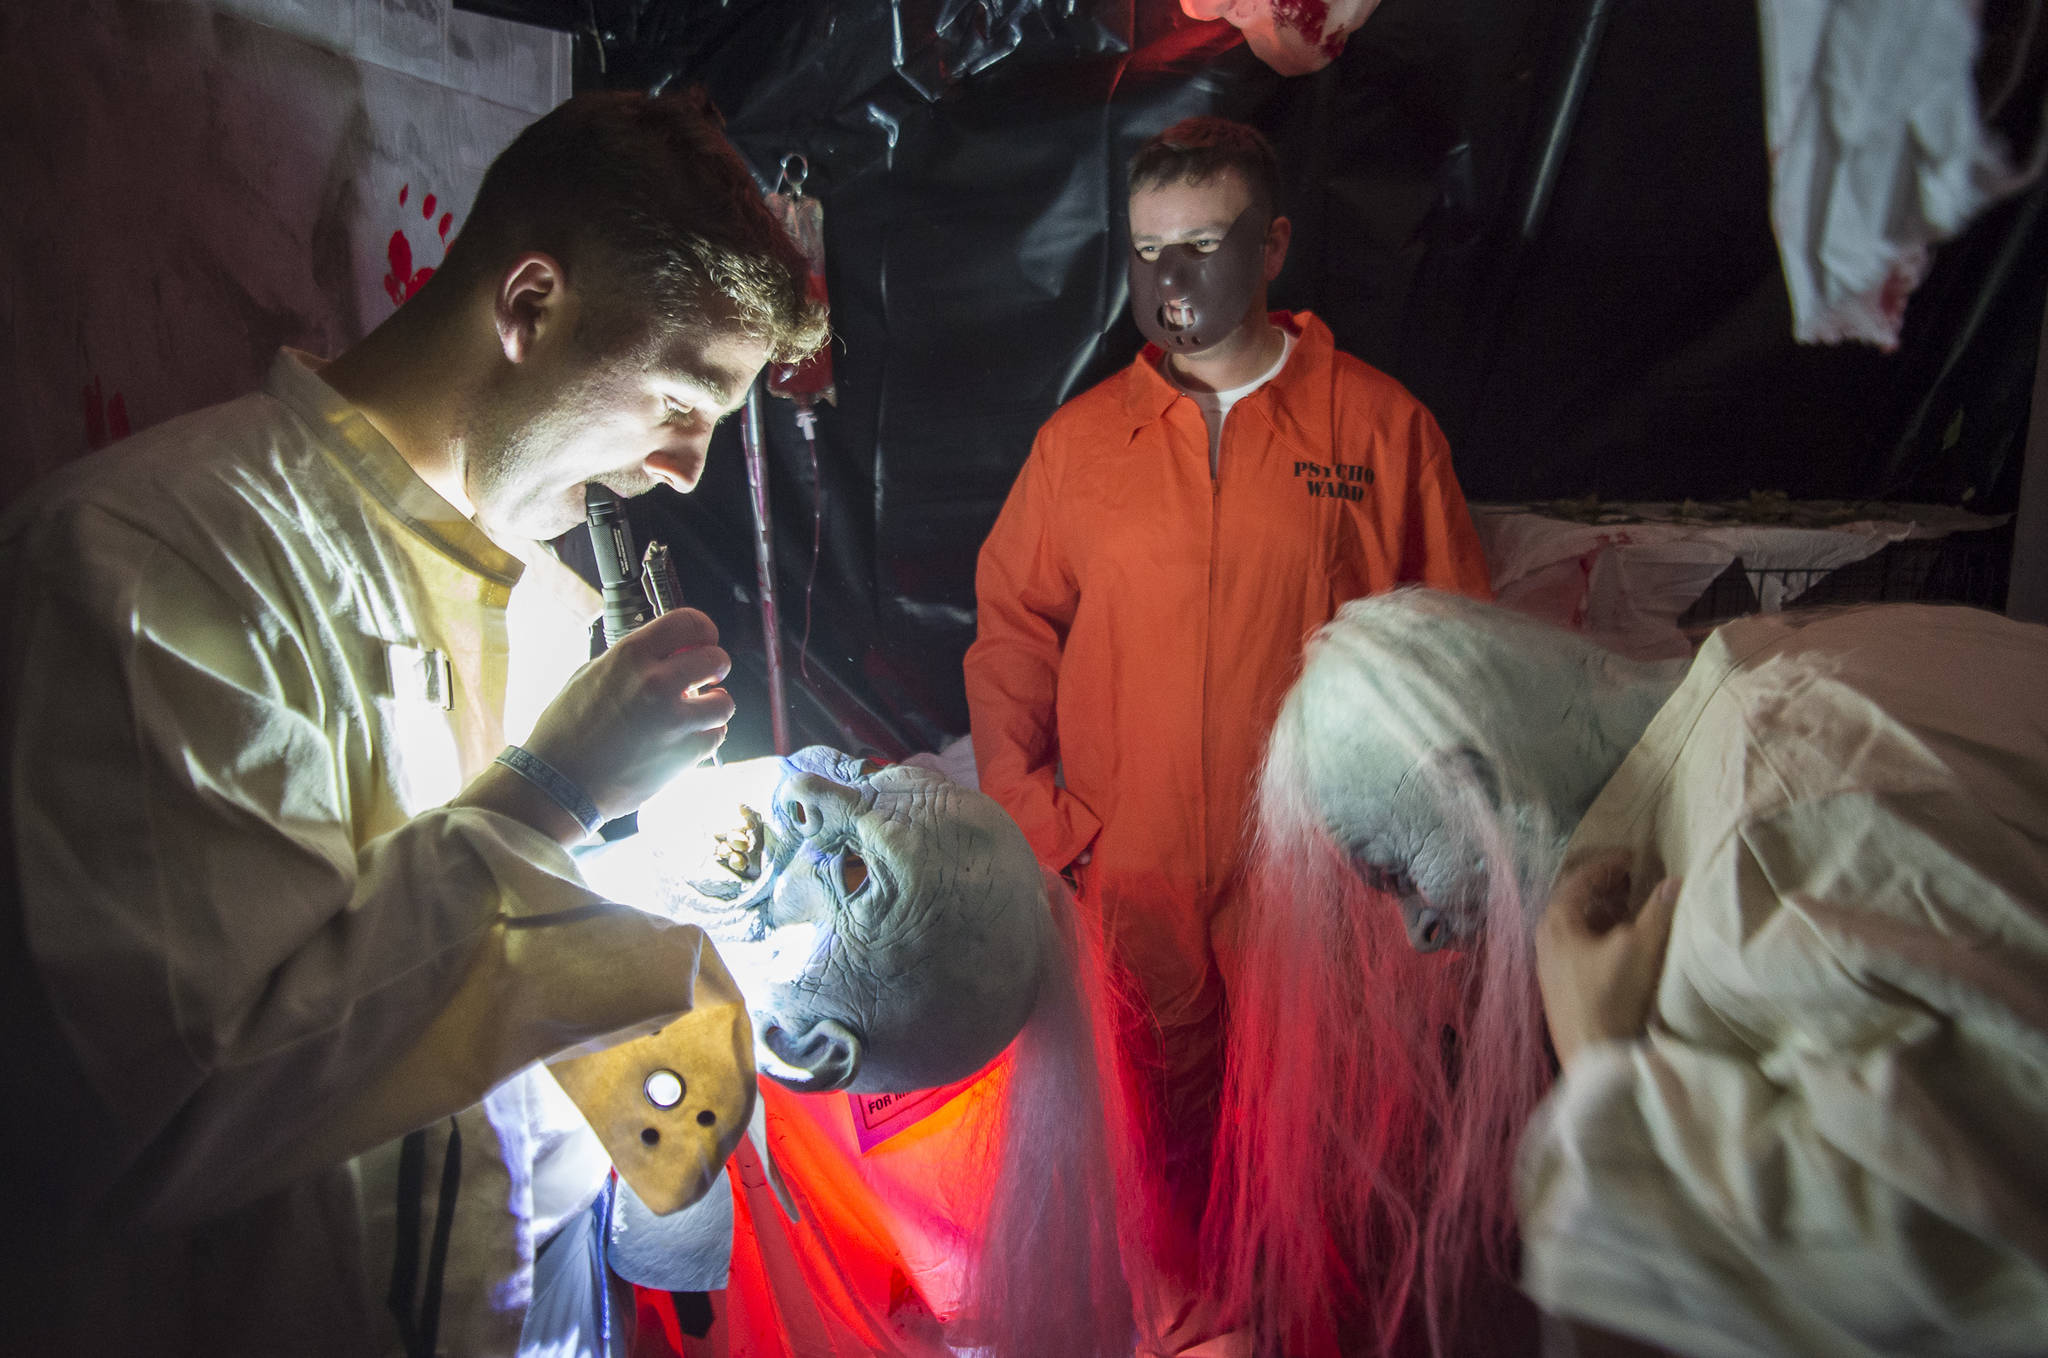 Anthonyu Hotka customizes his mask at the Haunted Station at the U.S. Coast Guard’s Station Juneau on Friday, Oct. 26, 2018. Station personnel pay for all the decoration themselves and take three weeks to ready the station. Entry is non perishable food items for the Southeast Alaska Food Bank. (Michael Penn | Juneau Empire)